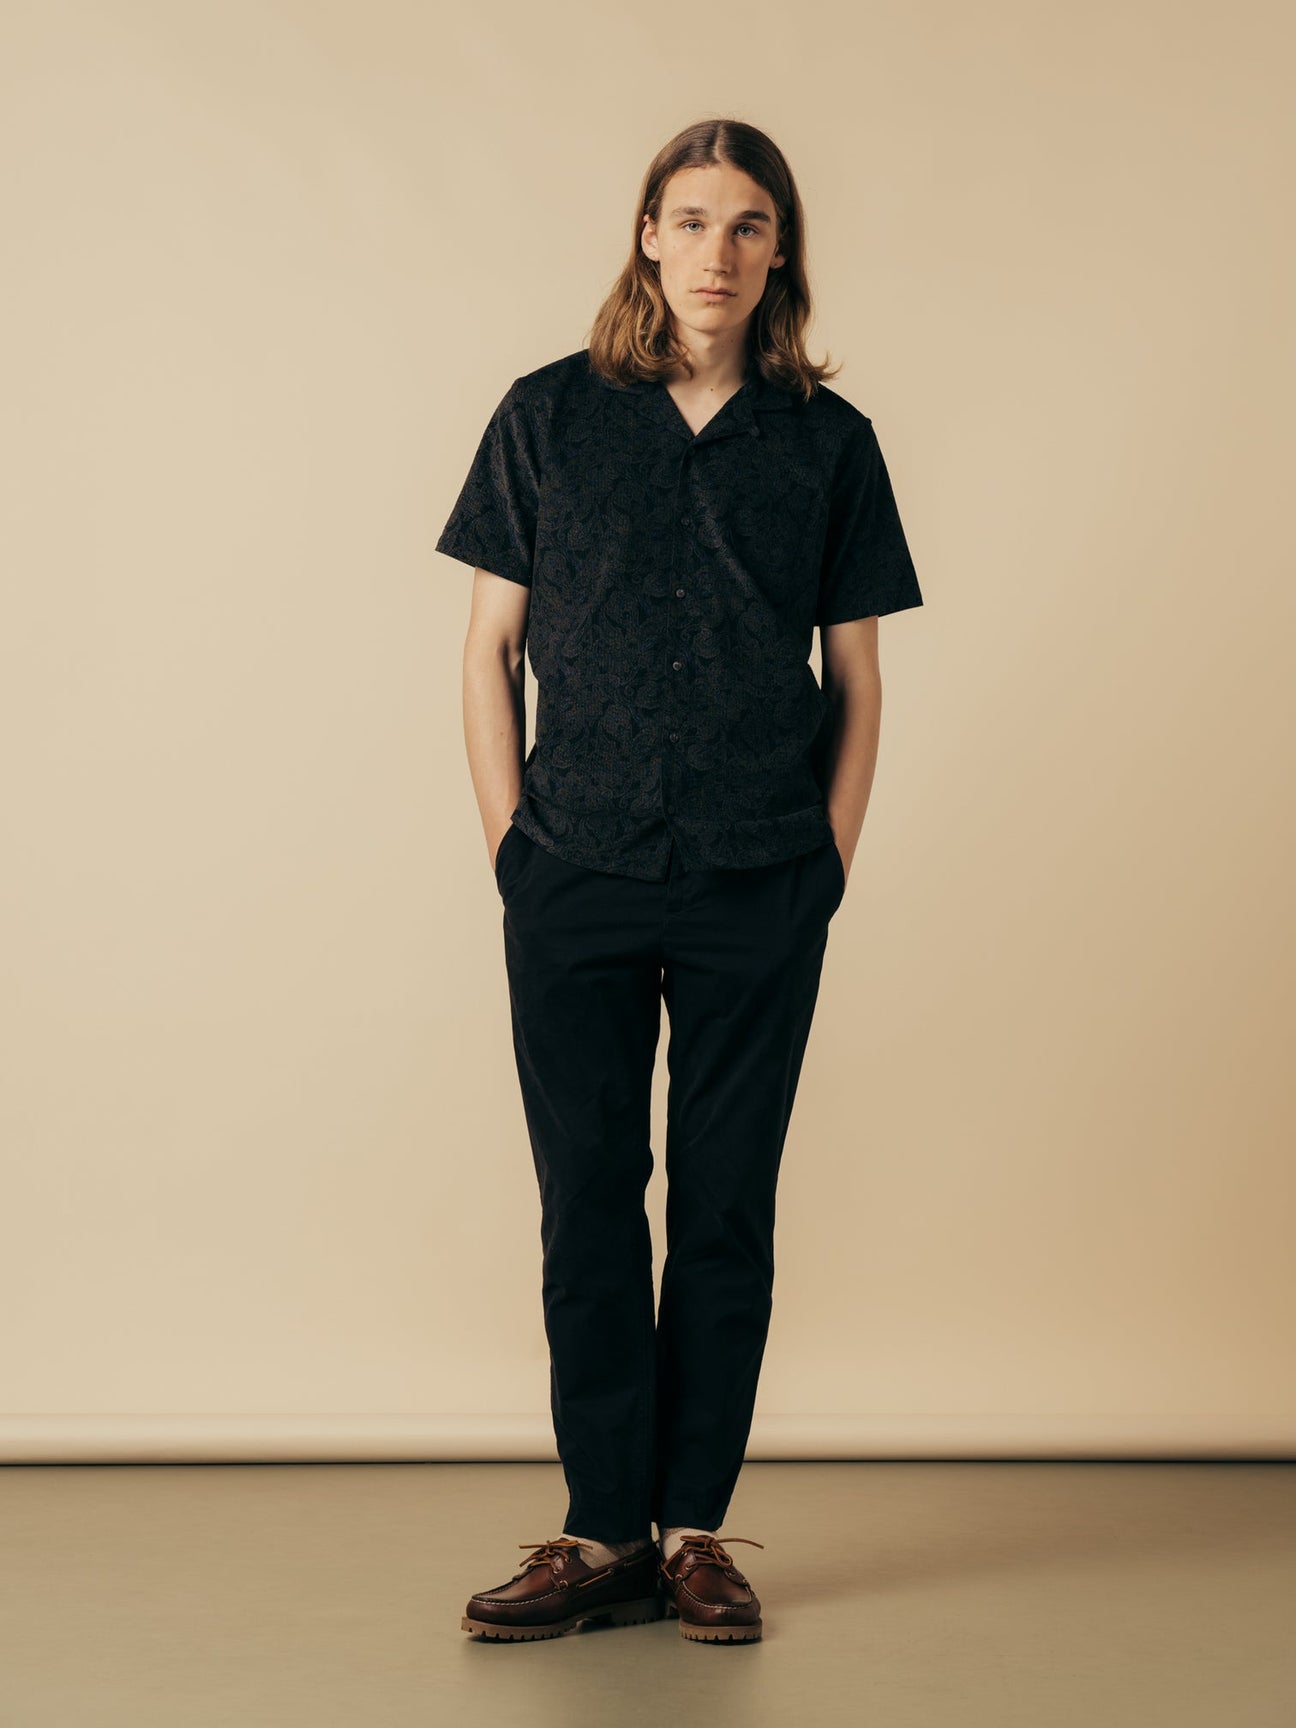 A model wearing a pair of black slim tapered trousers.